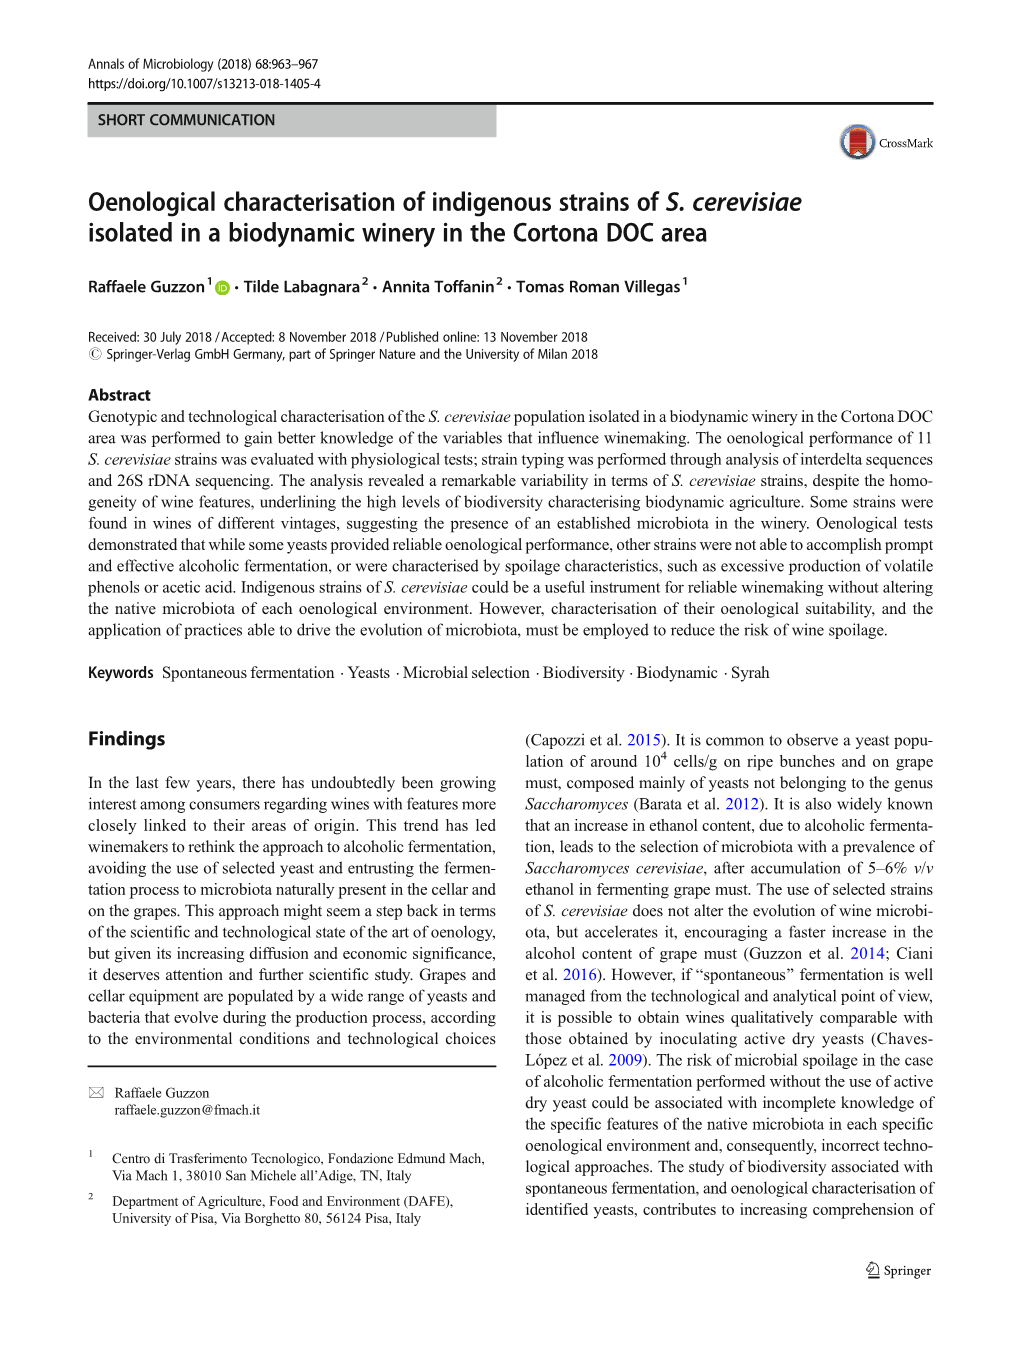 Oenological Characterisation of Indigenous Strains of S. Cerevisiae Isolated in a Biodynamic Winery in the Cortona DOC Area